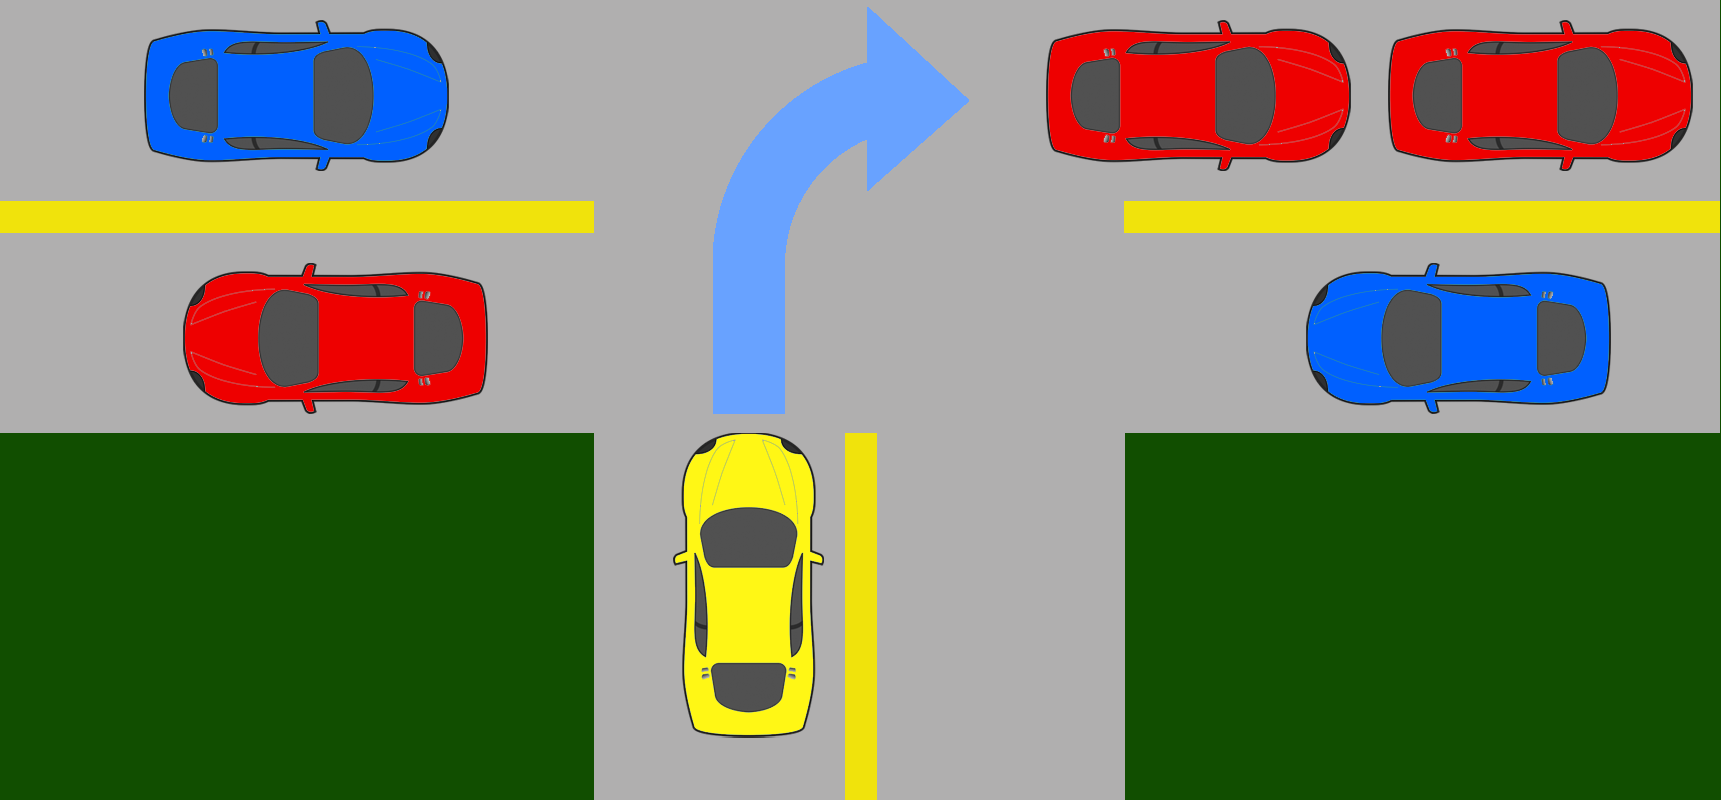 Vehicle attempting to merge into an uncontrolled intersection.